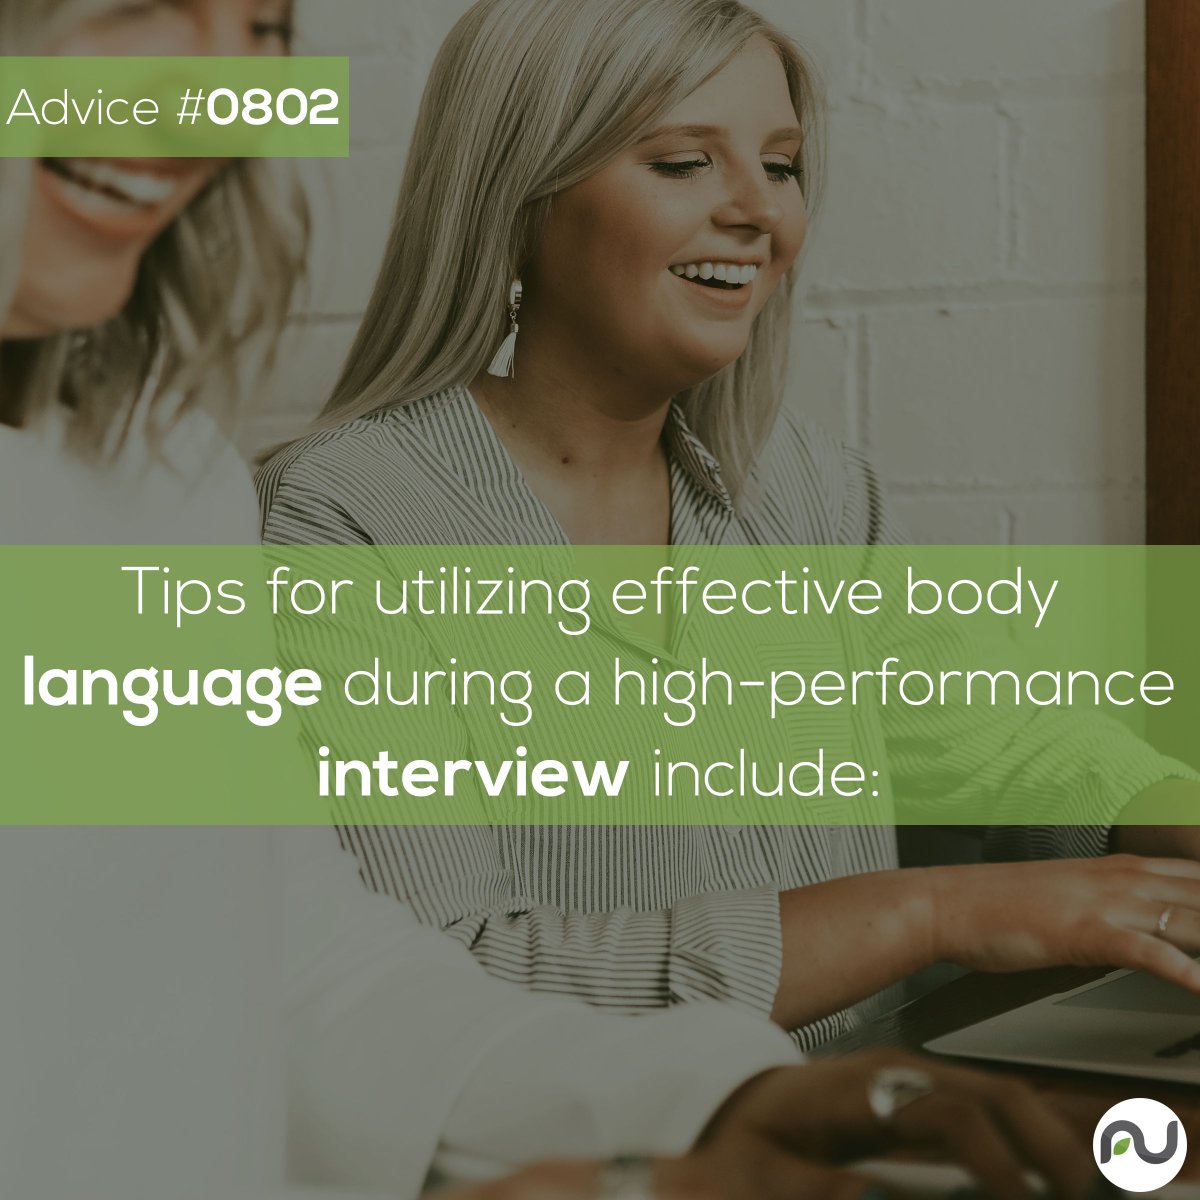 Advice #0802: An individual's nonverbal communication can provide insight into their thoughts, actions, and emotions. Presenting oneself poised and collected during an interview can make a positive impression and increase the likelihood of success.

#interviewadvice  #jobsearch